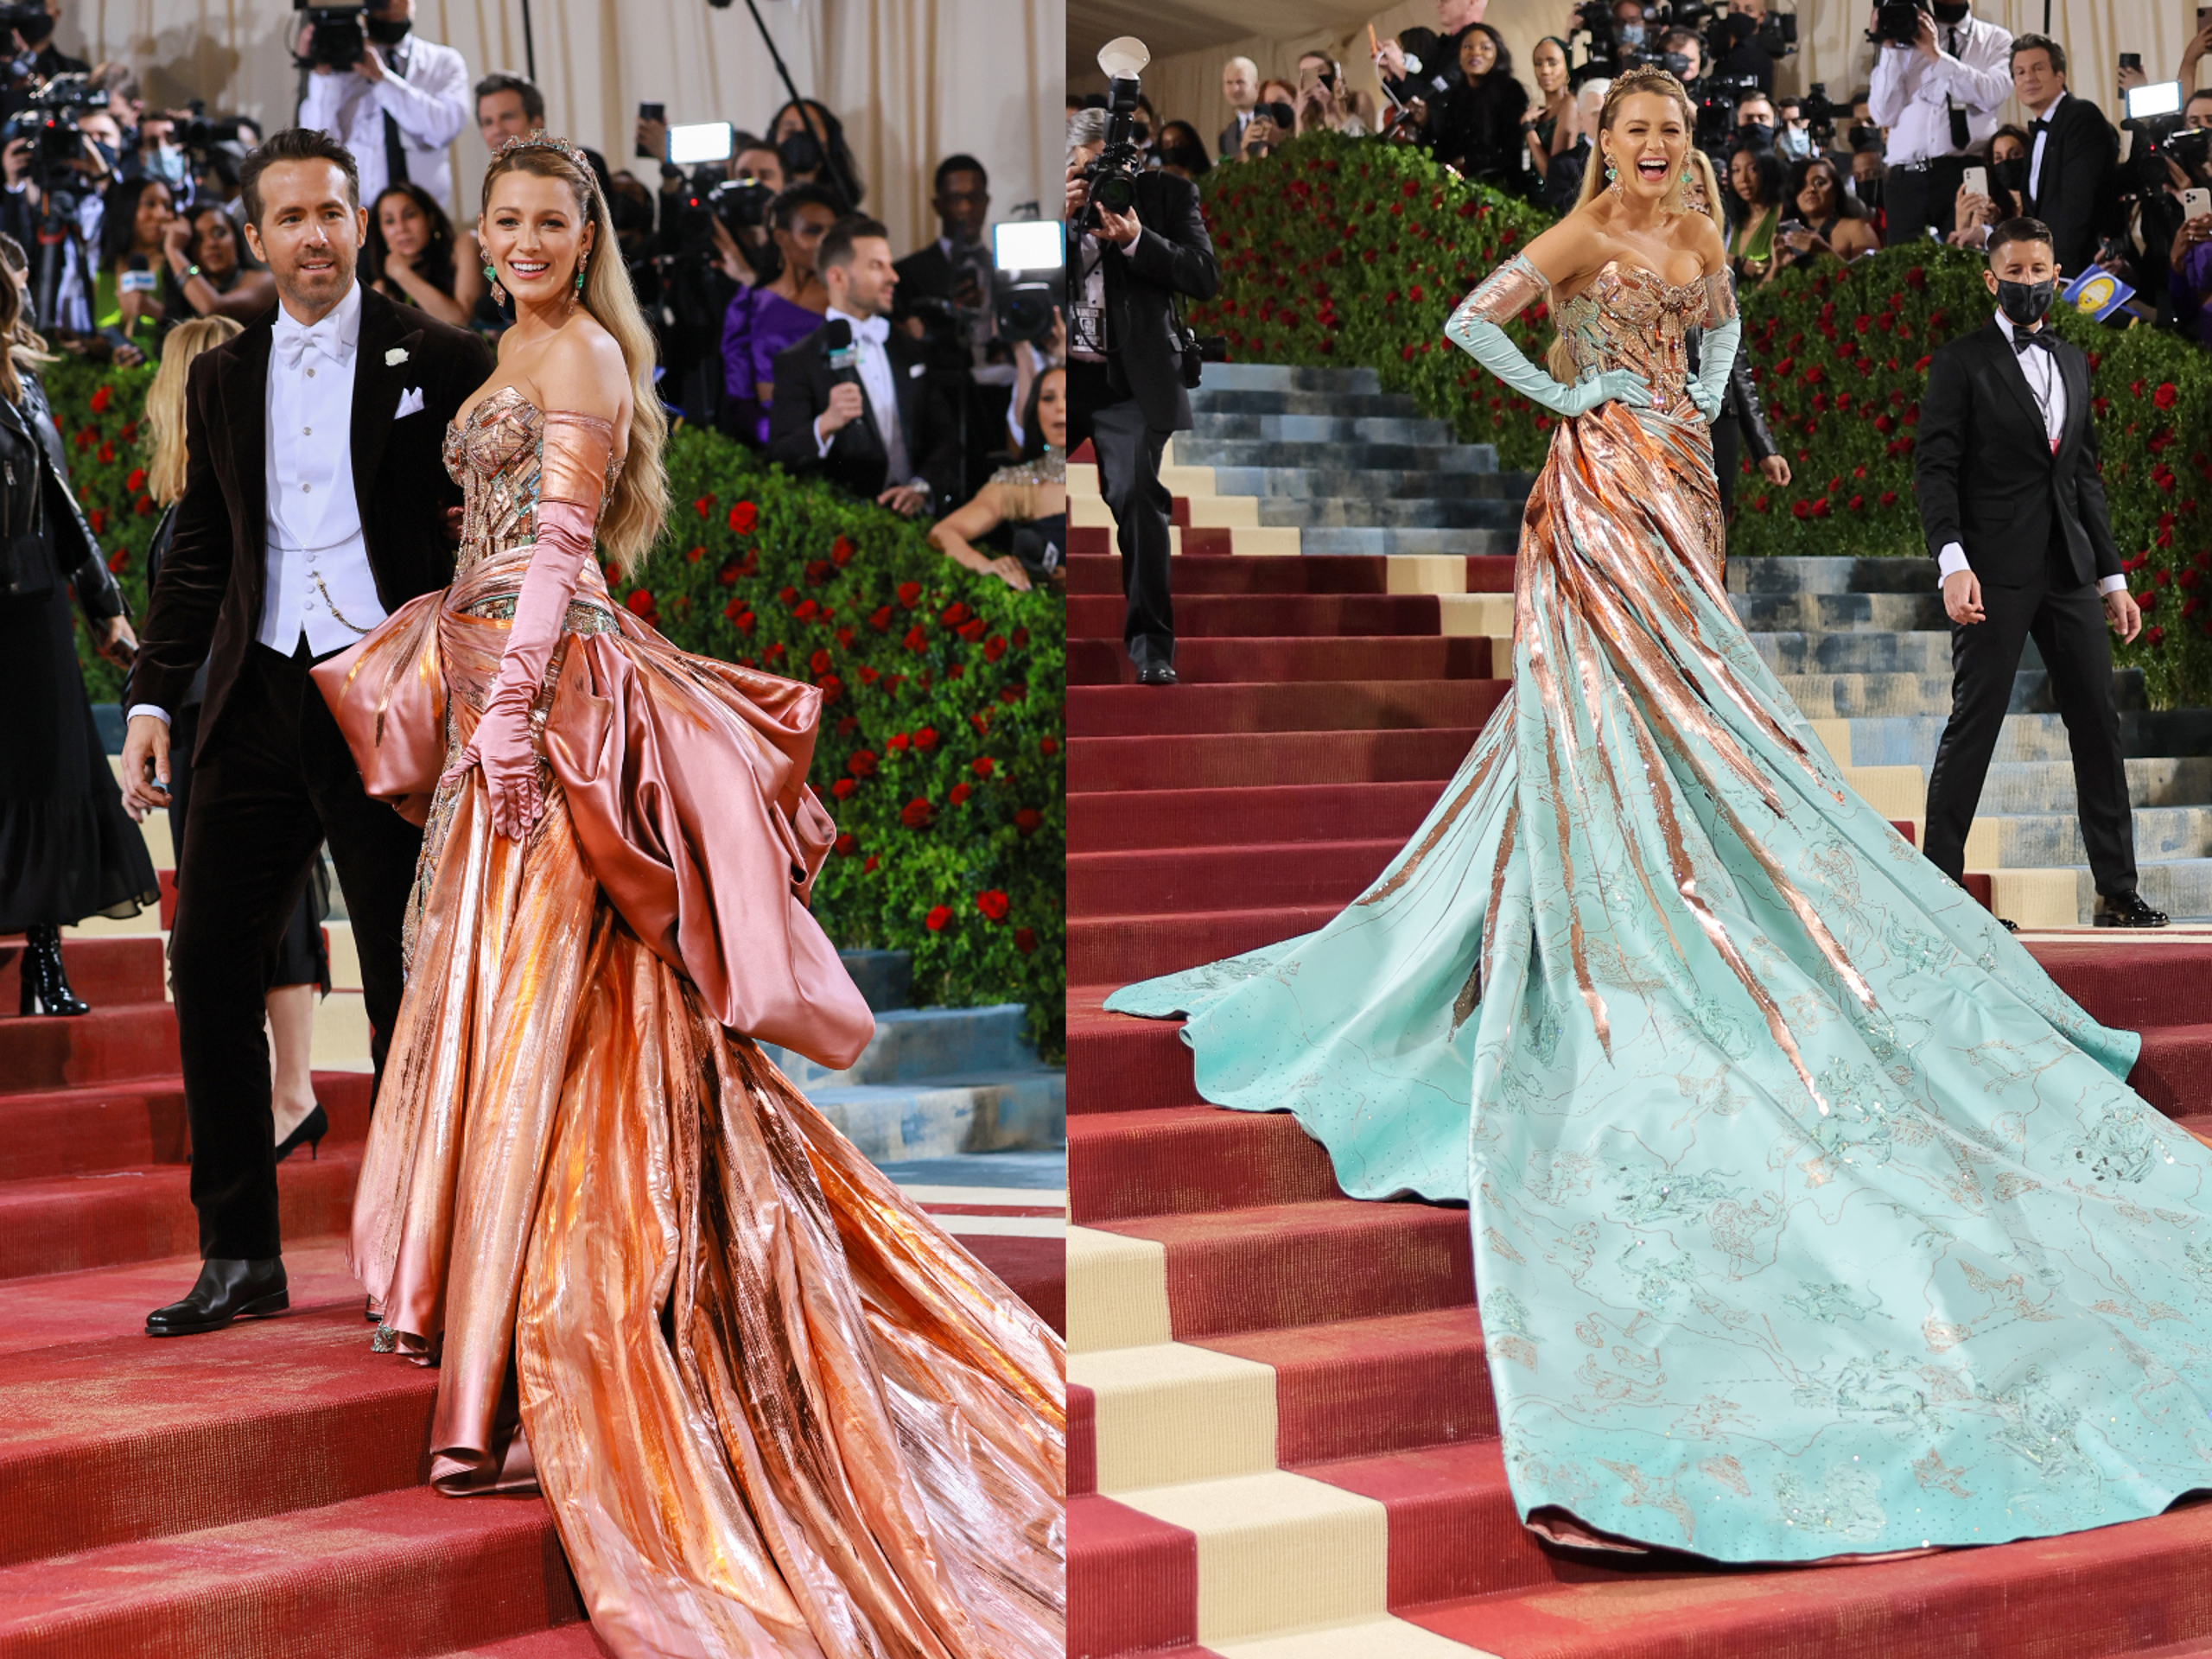 Blake Lively (pictured on the left with husband and fellow Met Gala co-chair Ryan Reynolds) stunned on the red carpet with a quick-change.